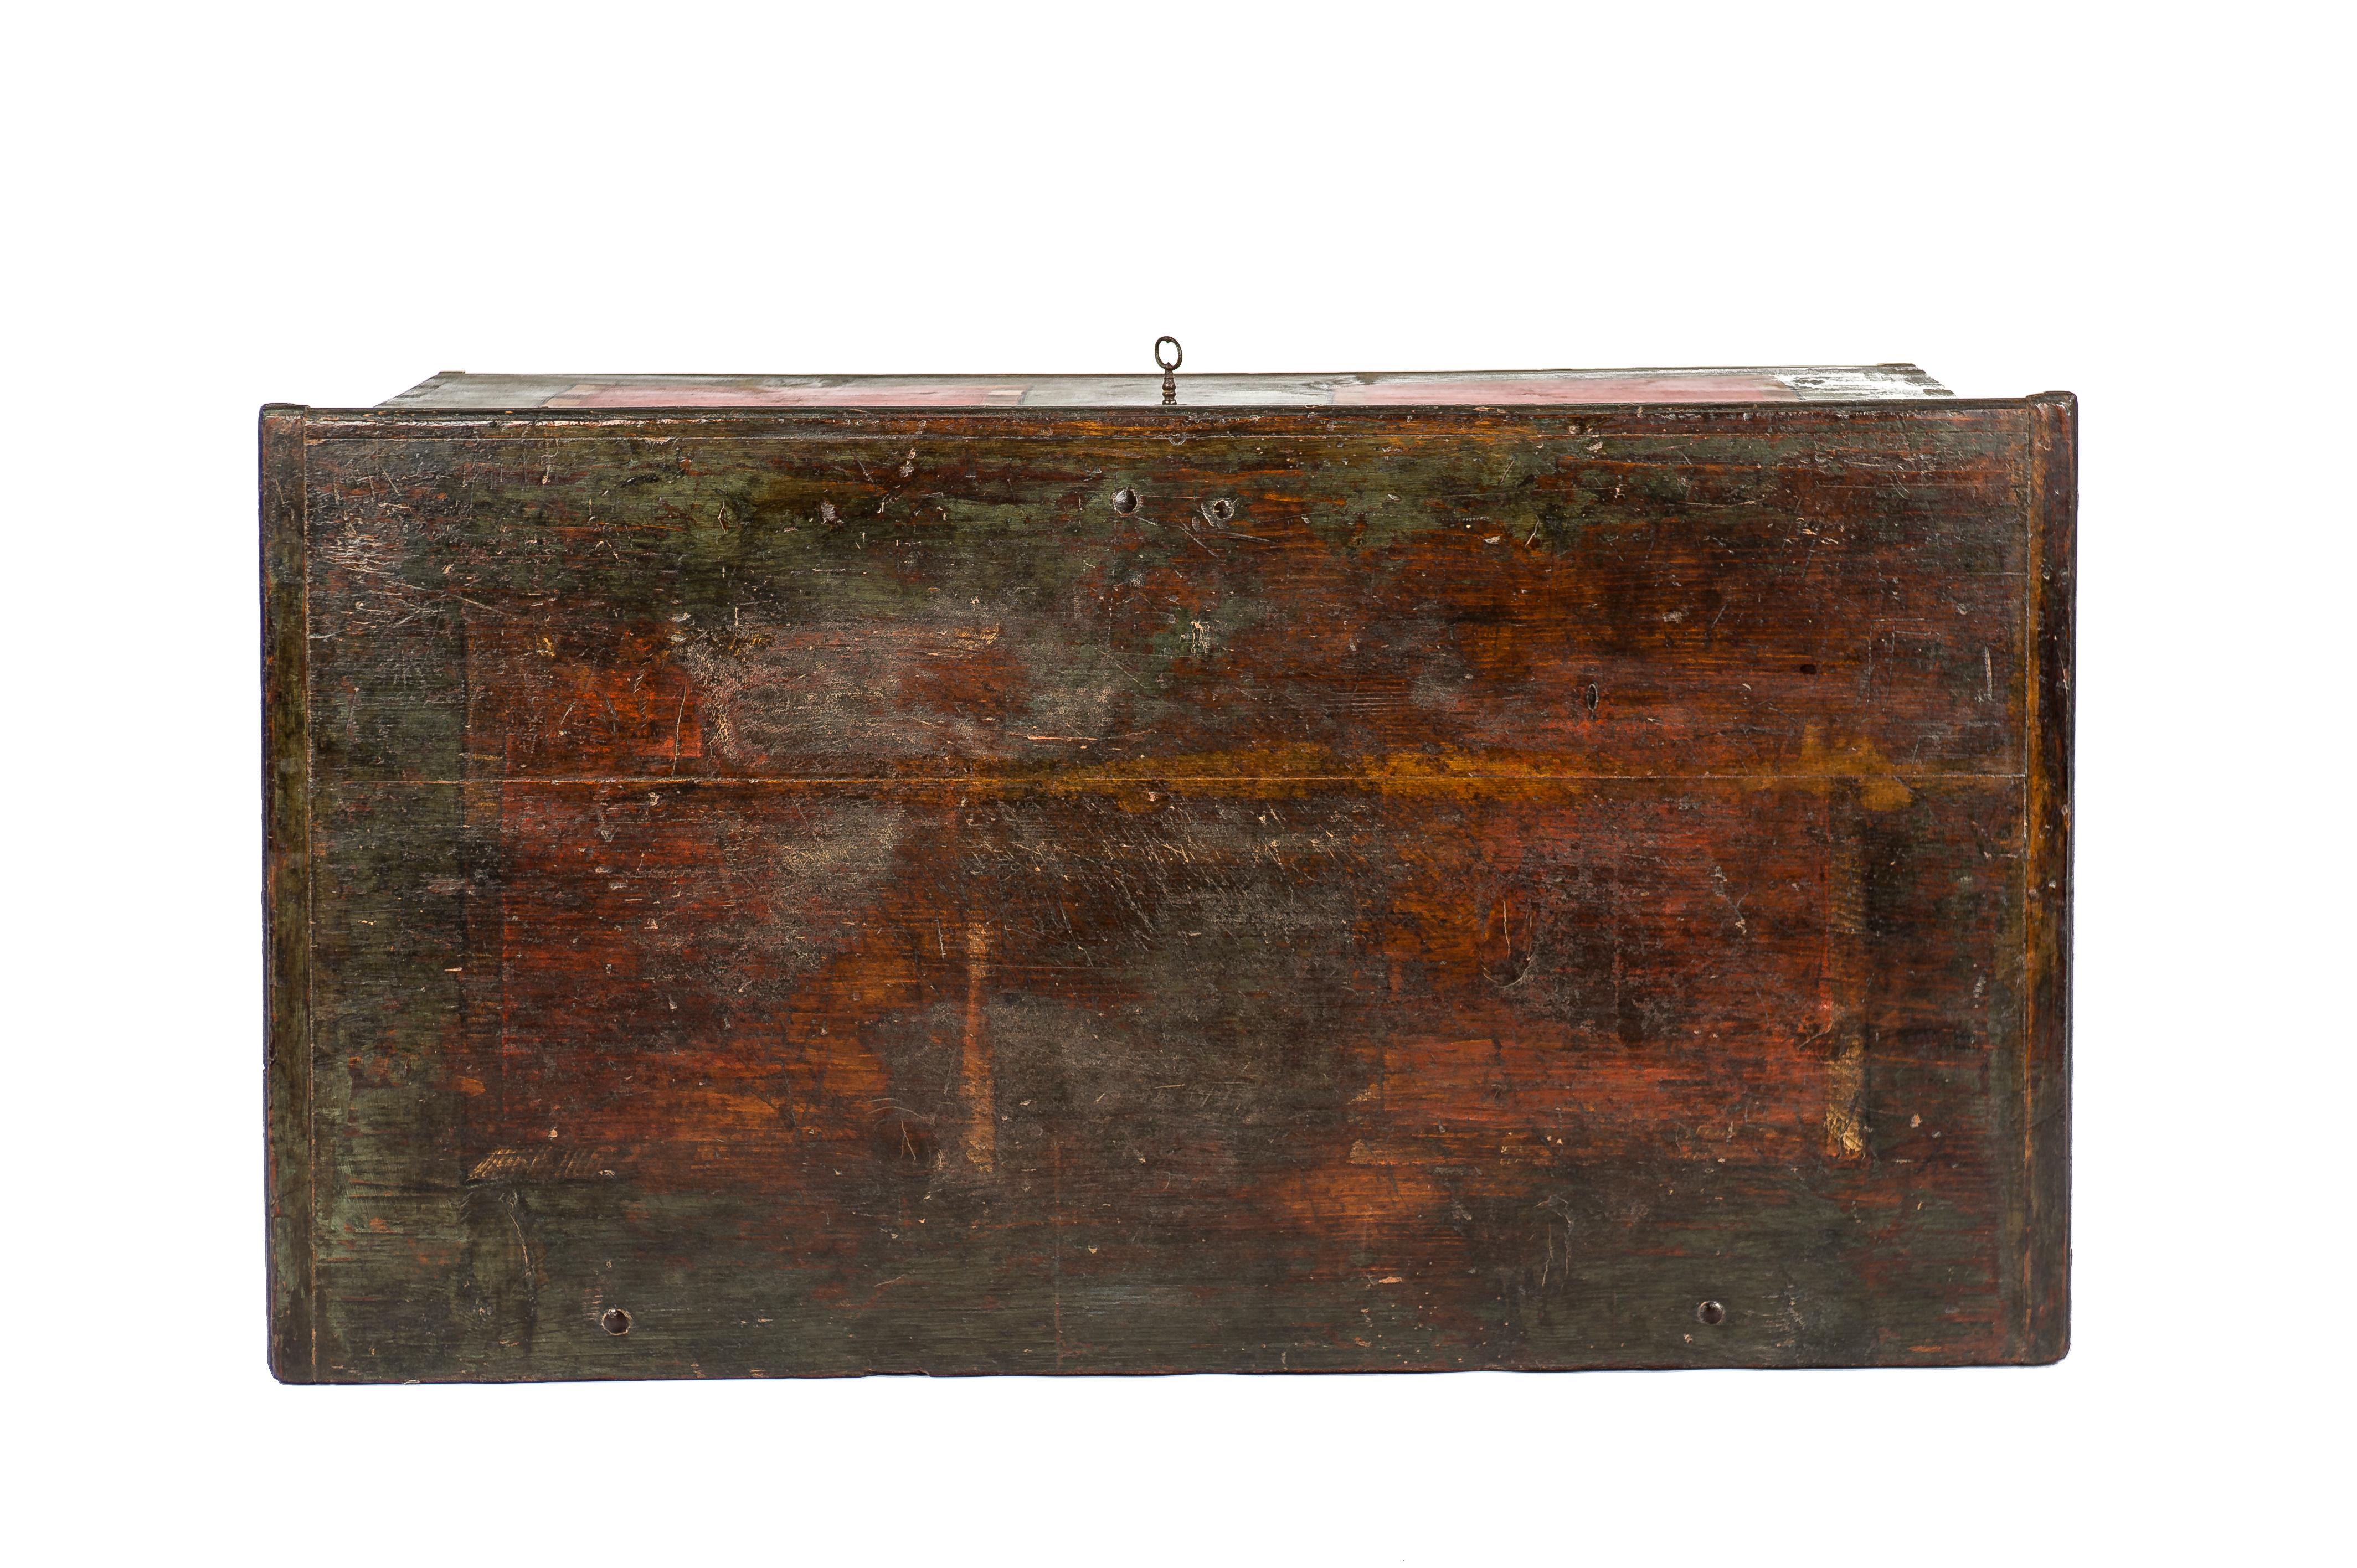 Steel Antique 19th Century Solid Pine and Traditional Painted Bohemian Trunk or Chest For Sale